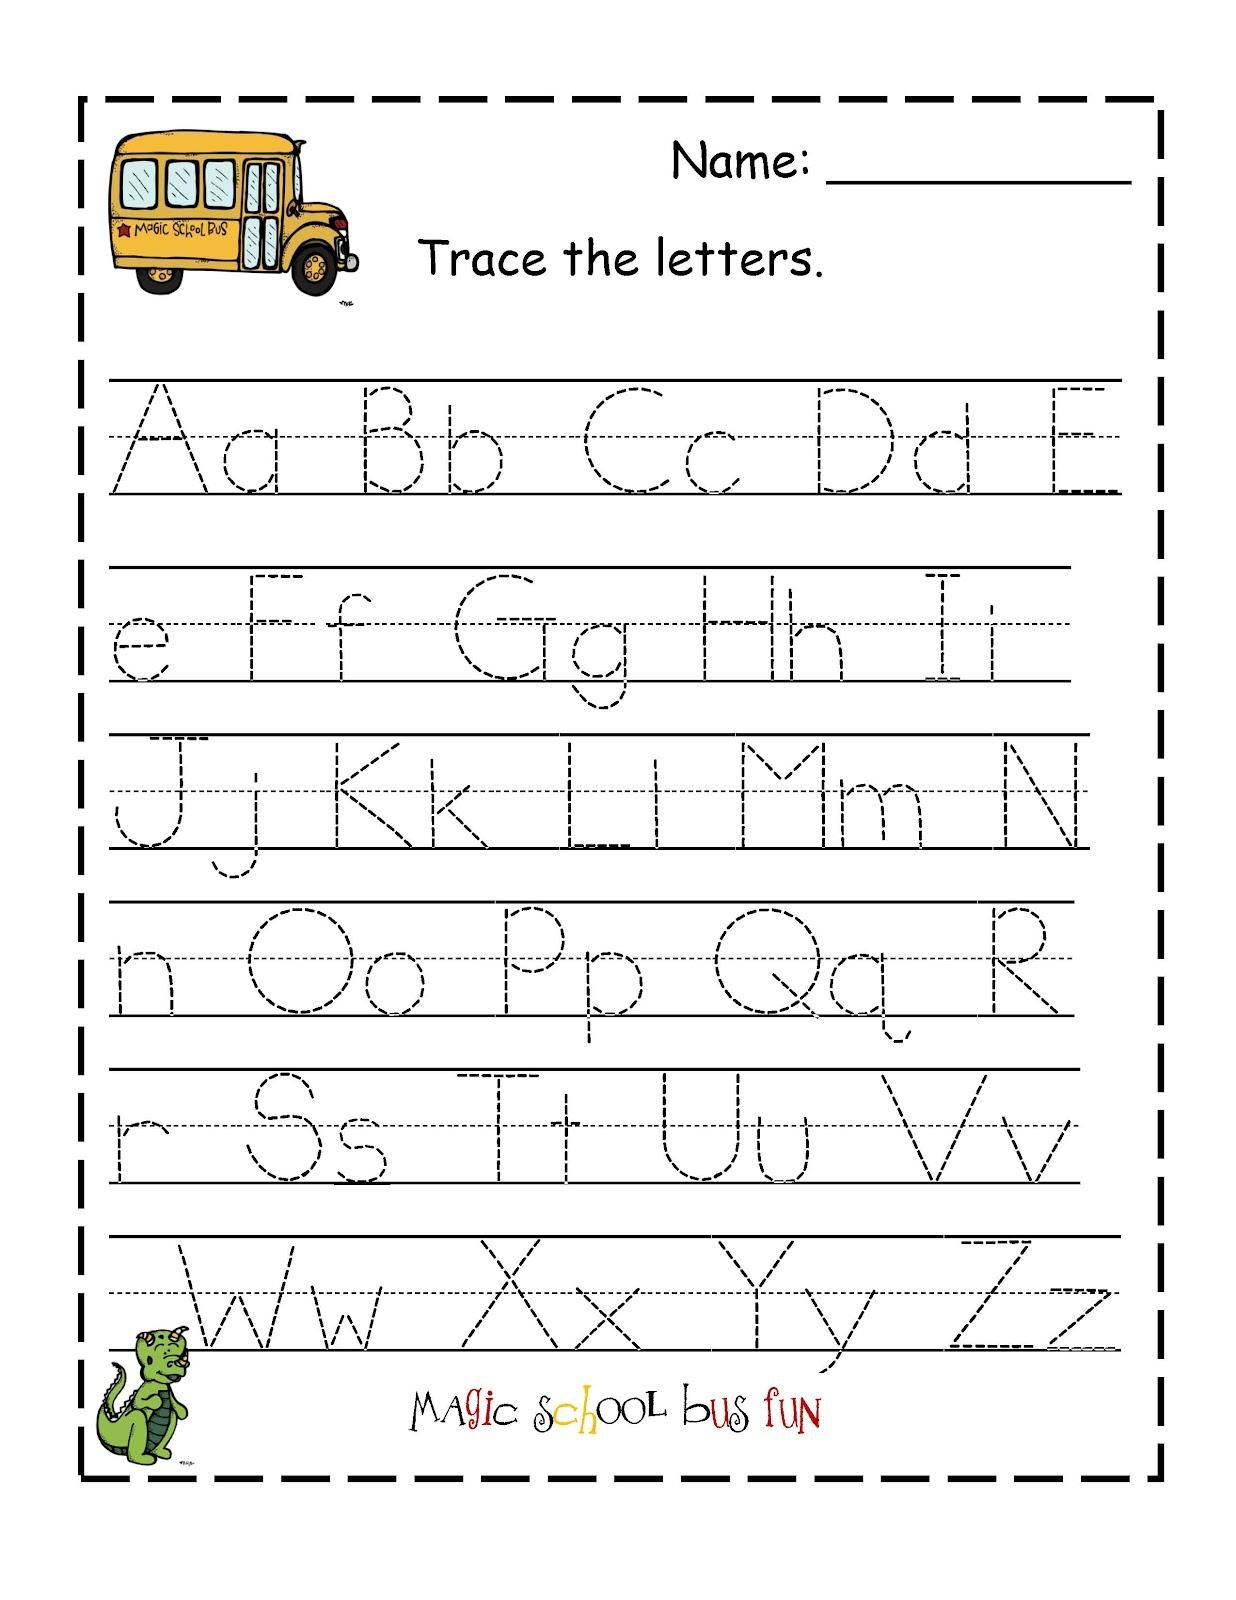 Free Printable Abc Tracing Worksheets #2 | Places To Visit | Printable Printing Worksheets